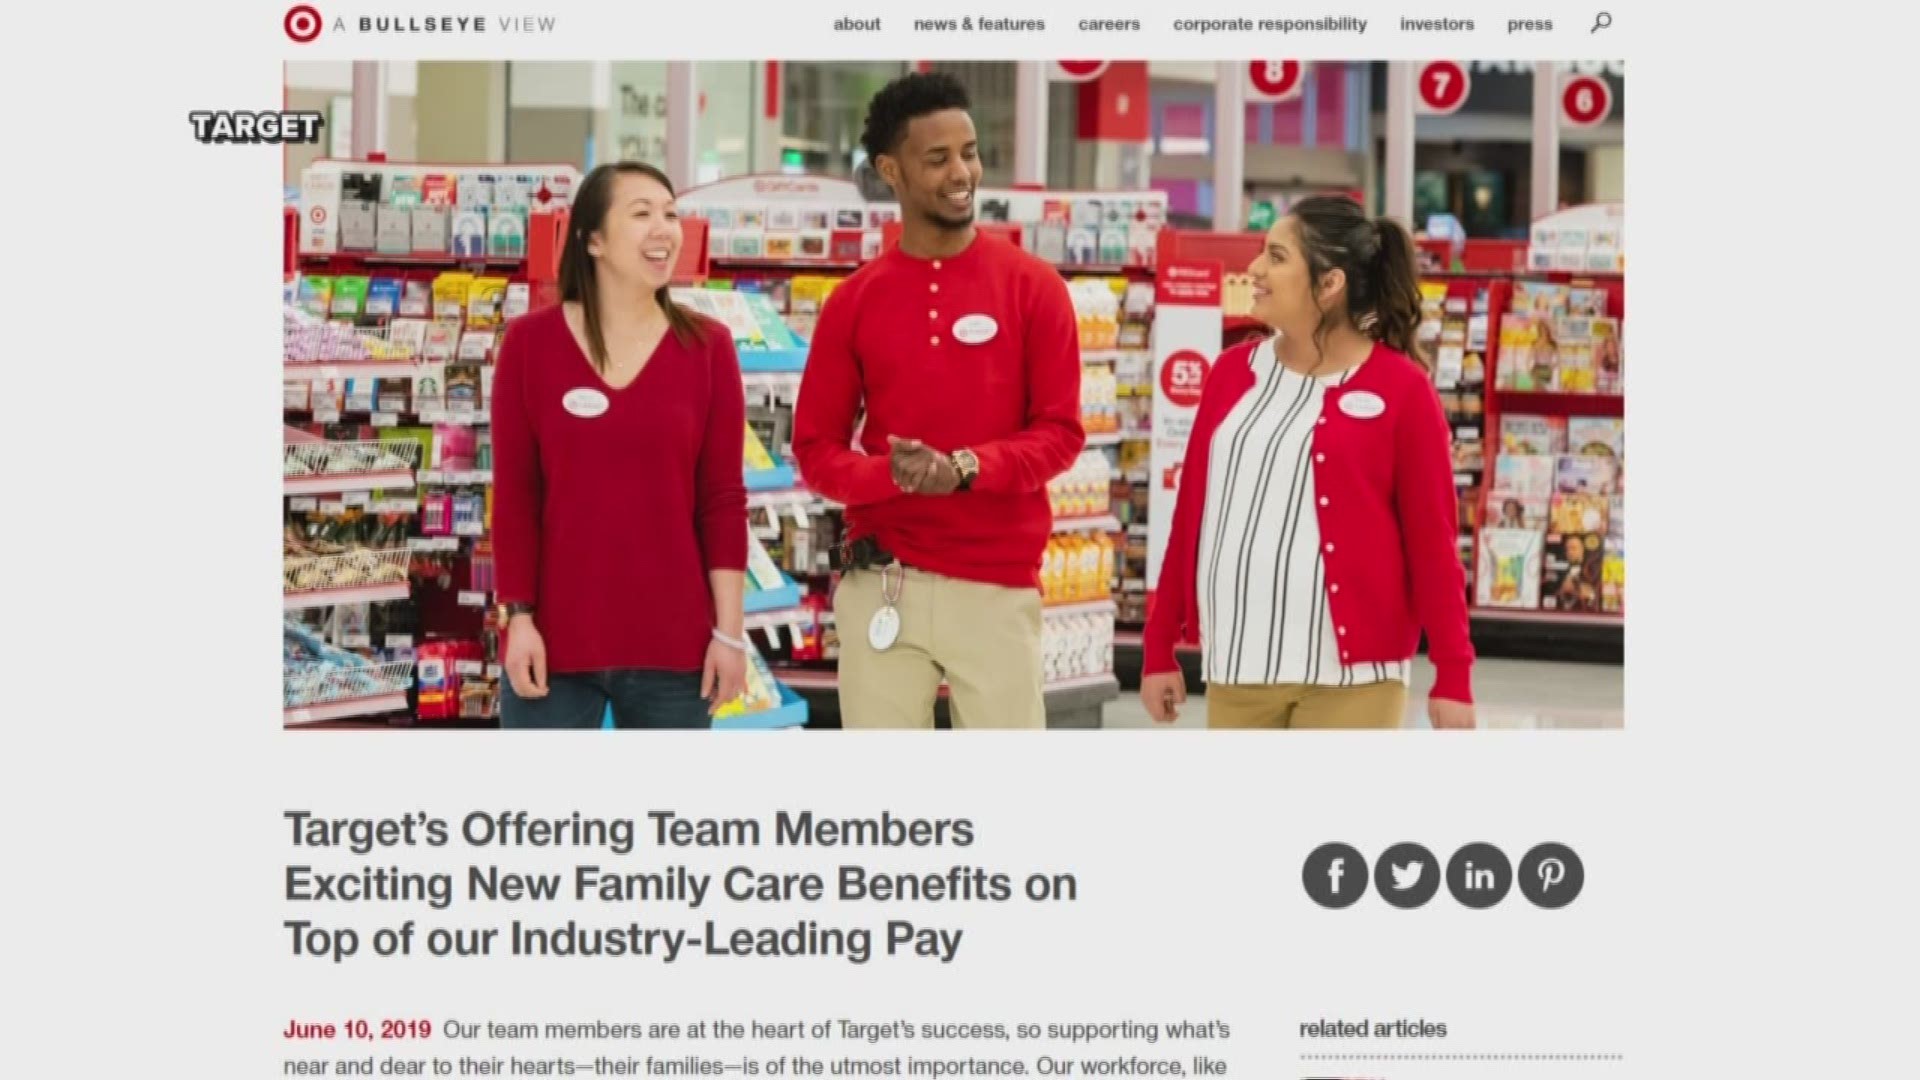 Target Corporation announced some new benefits Monday aimed at supporting employees with families.